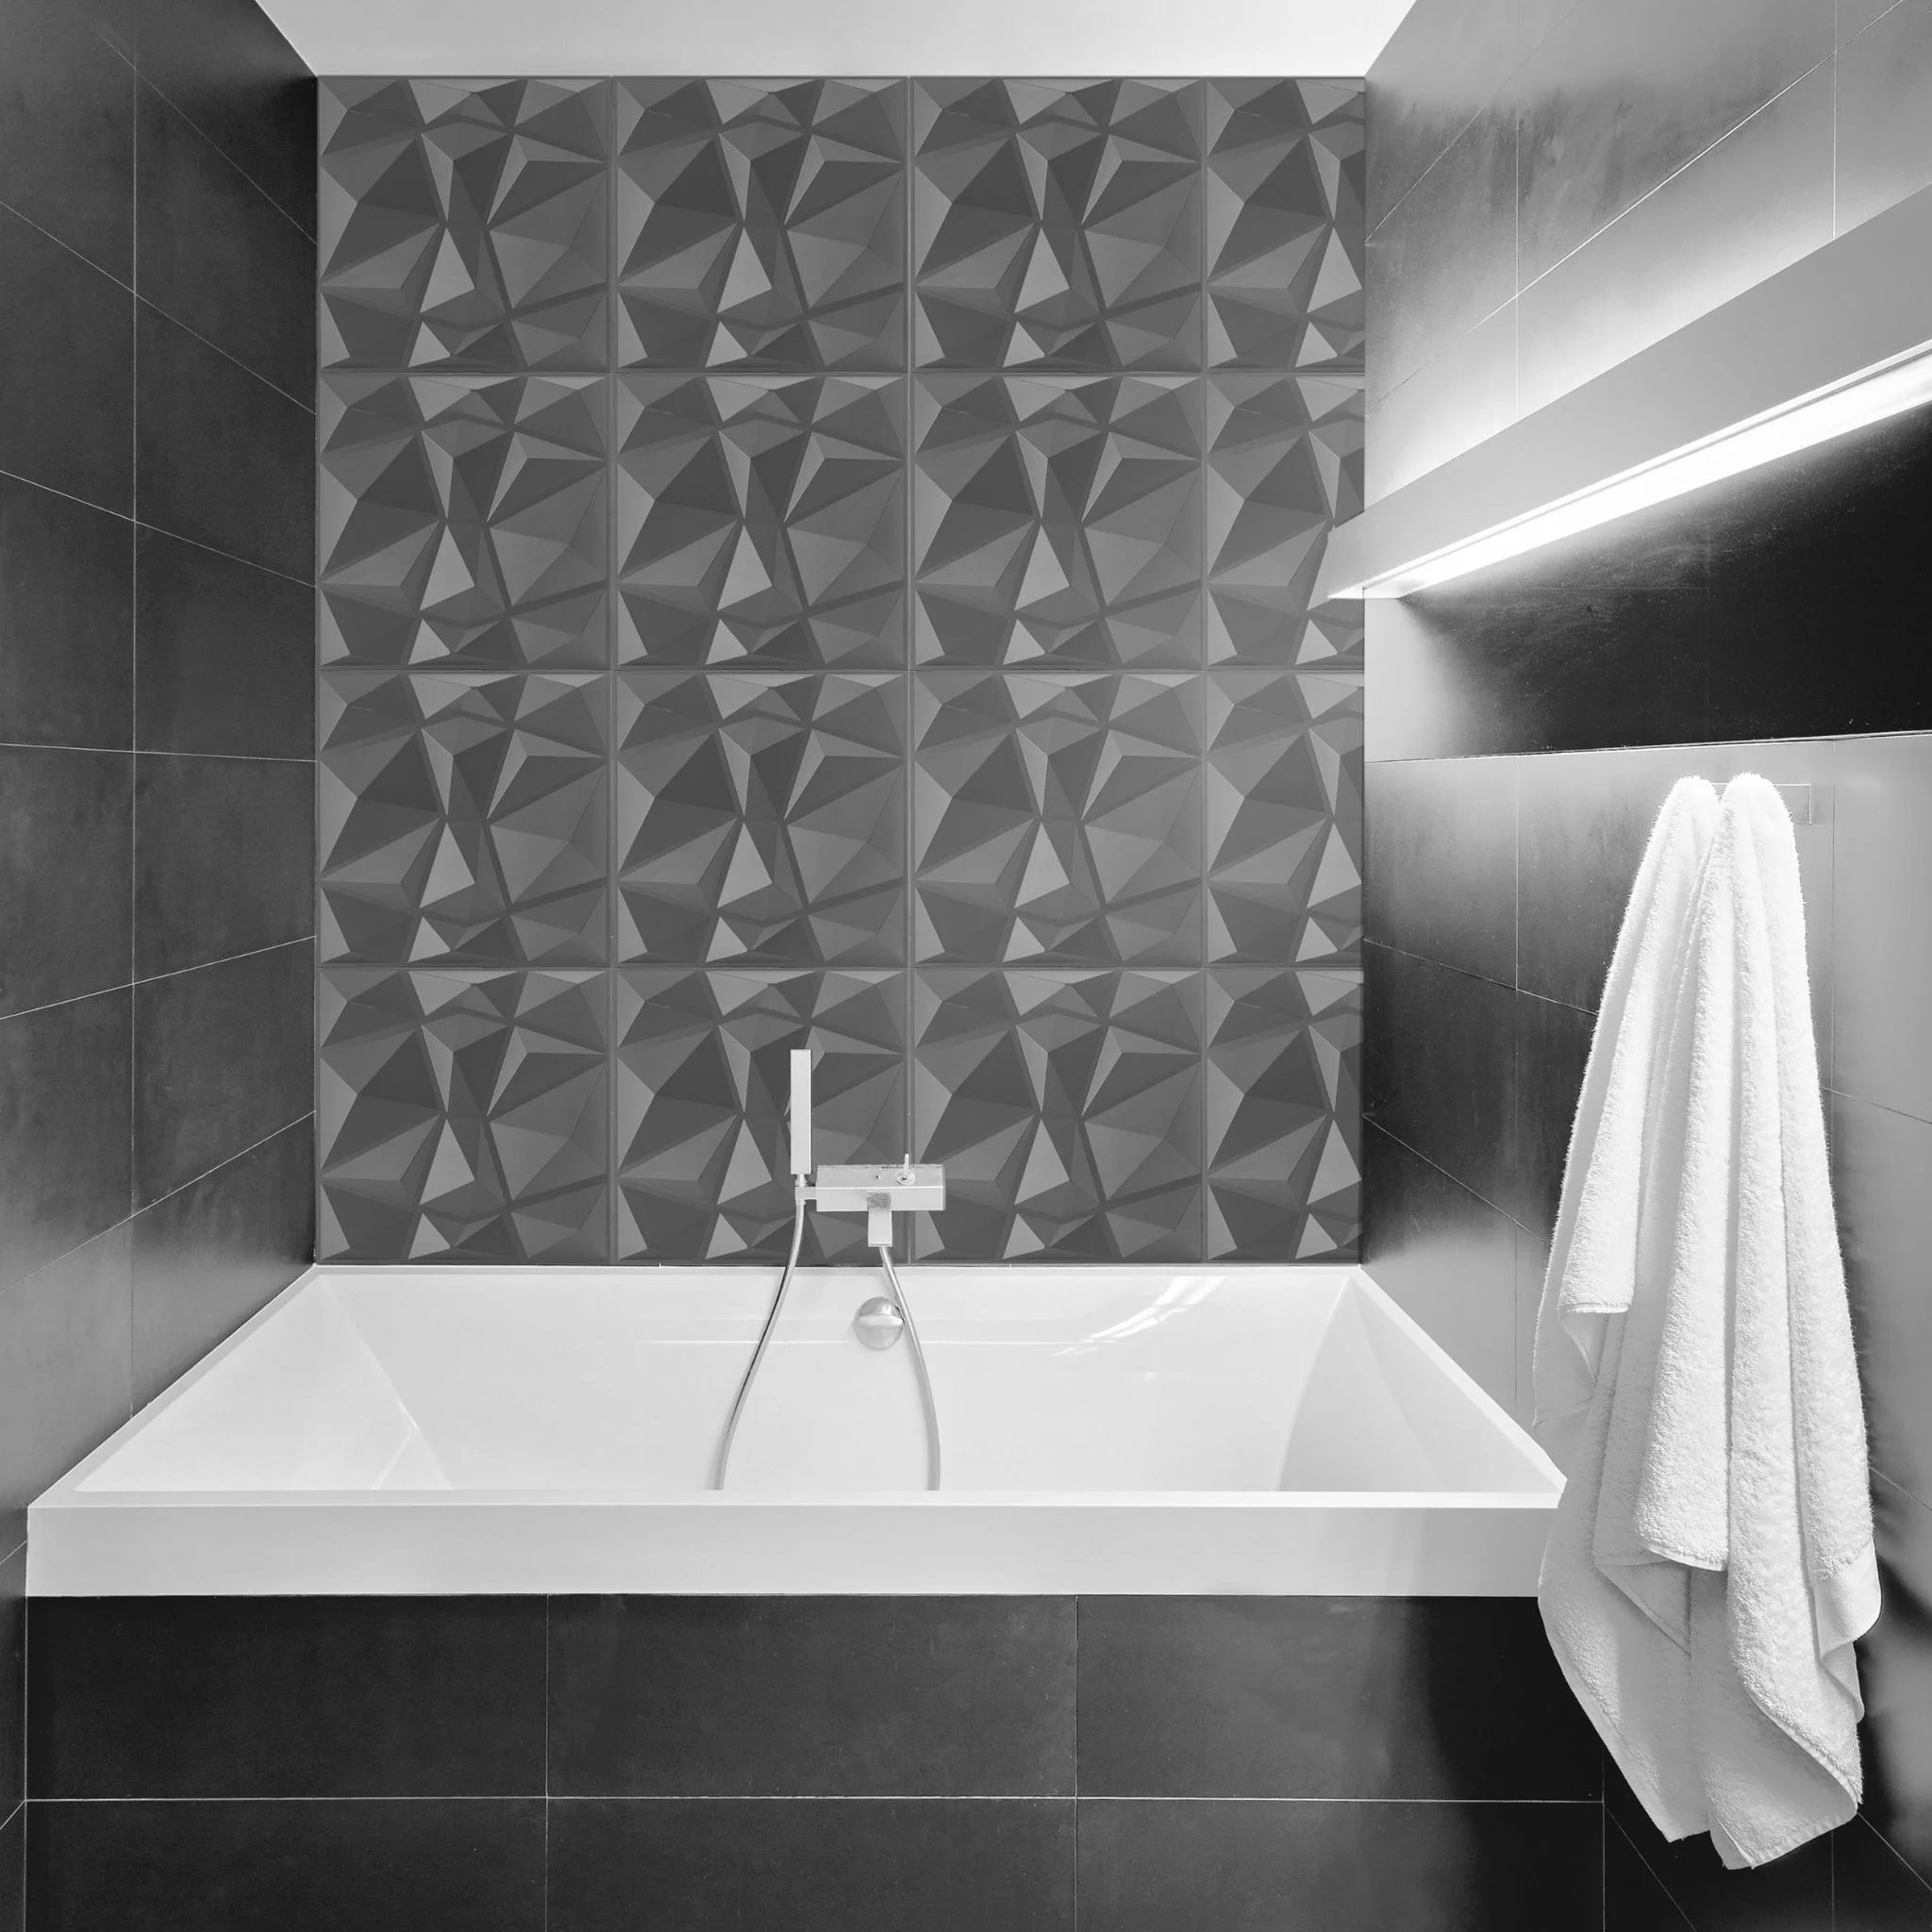 Bathroom with silver diamond-patterned PVC wall panels and modern furniture